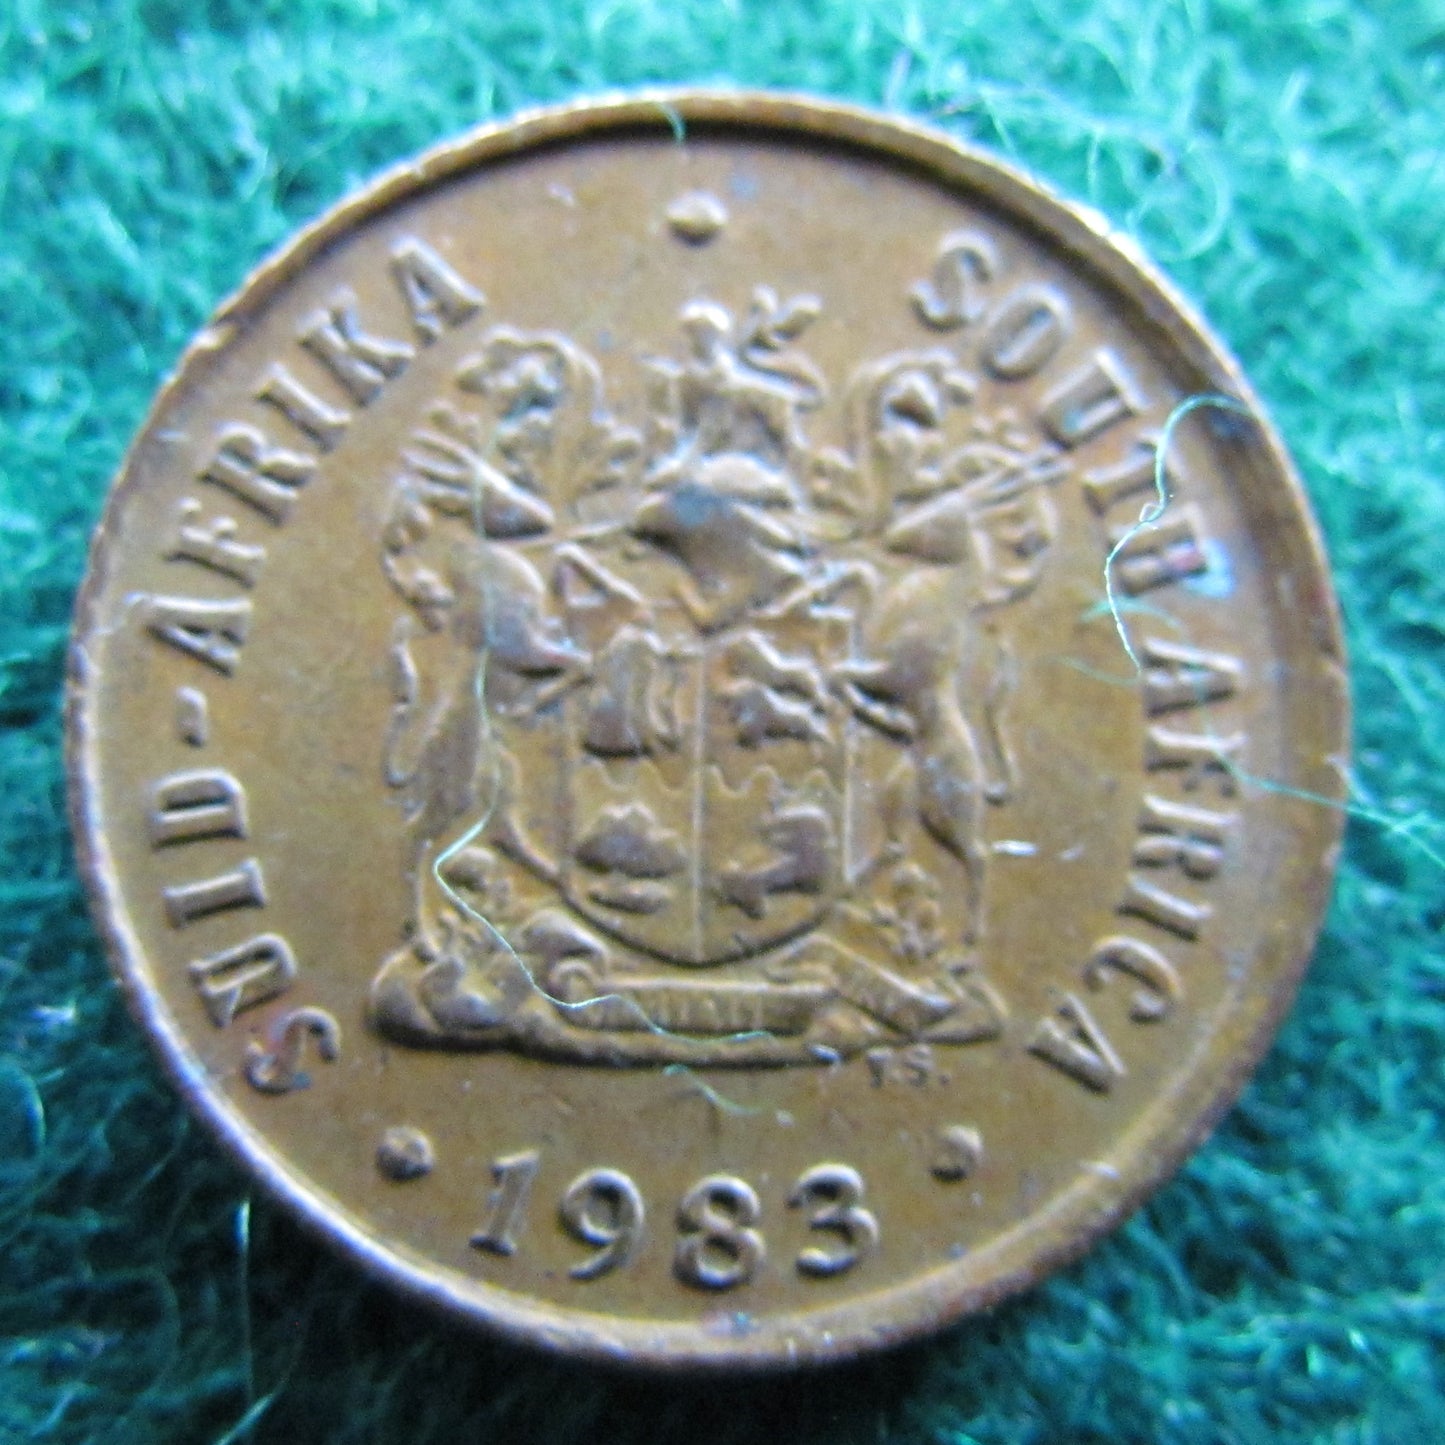 South Africa 1983 1 Cent Coin